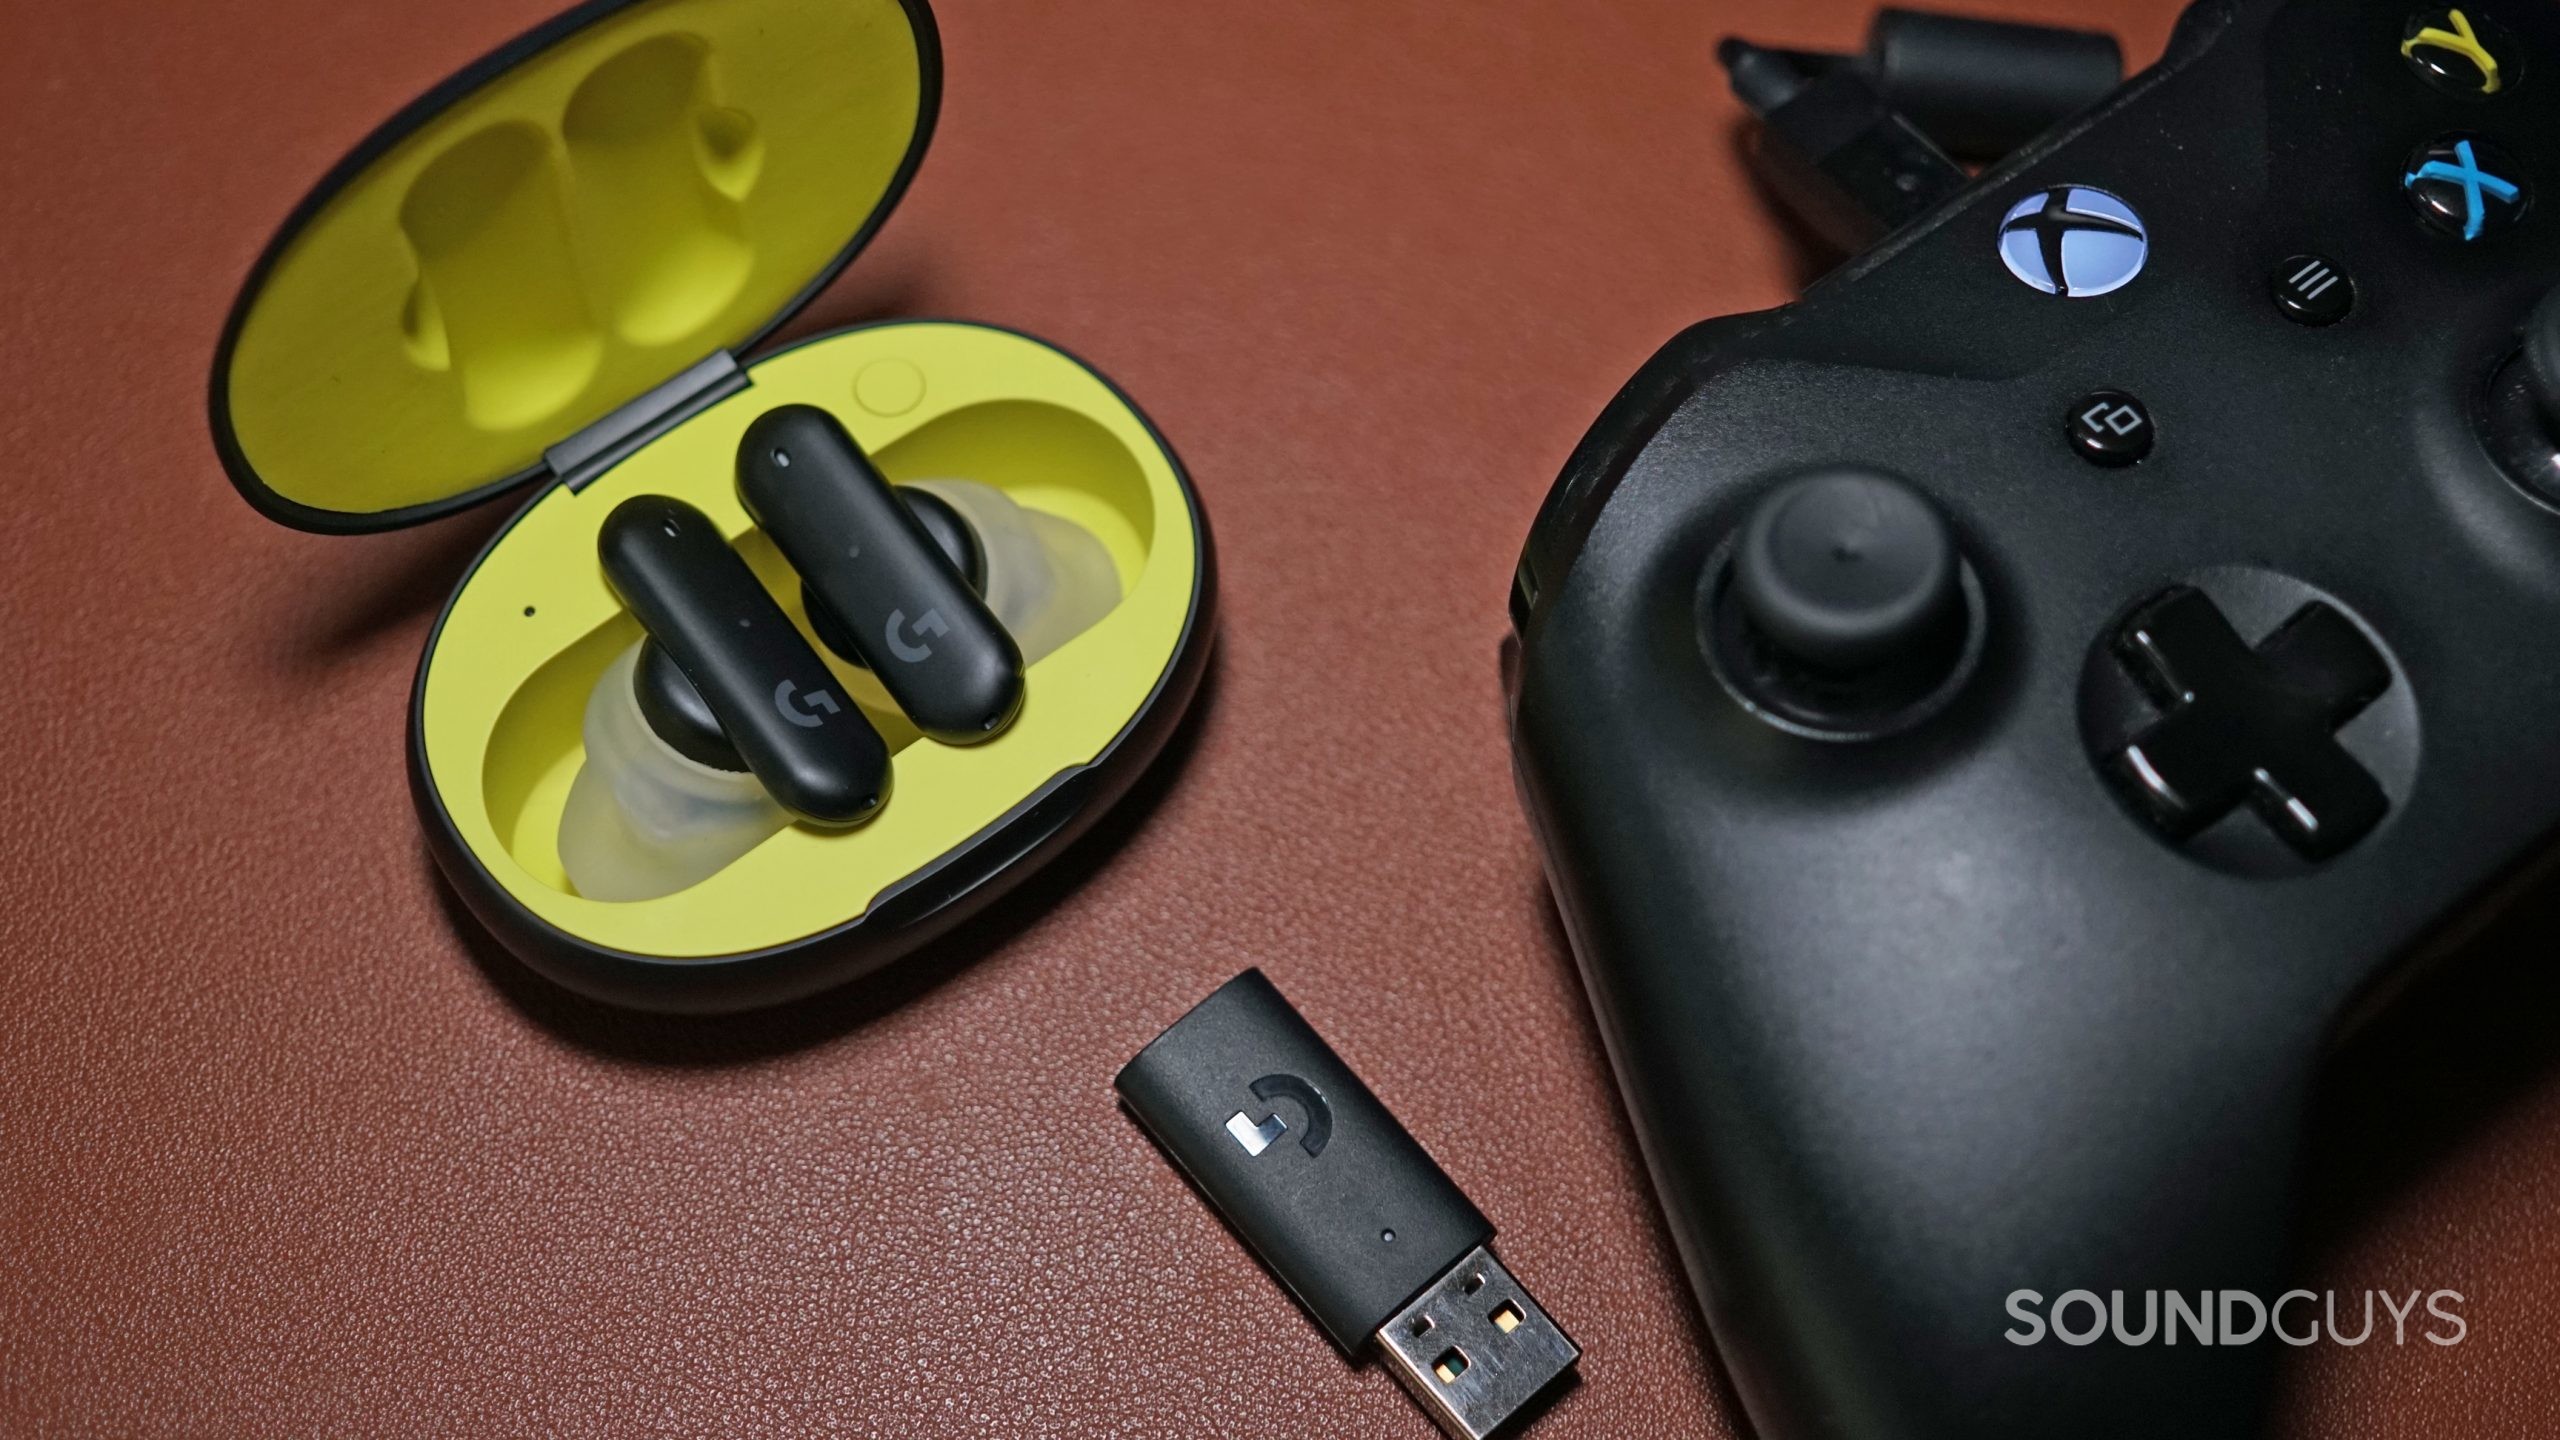 The Logitech G Fits earbuds sit in its charging case next to its USB dongle and an Xbox One controller.